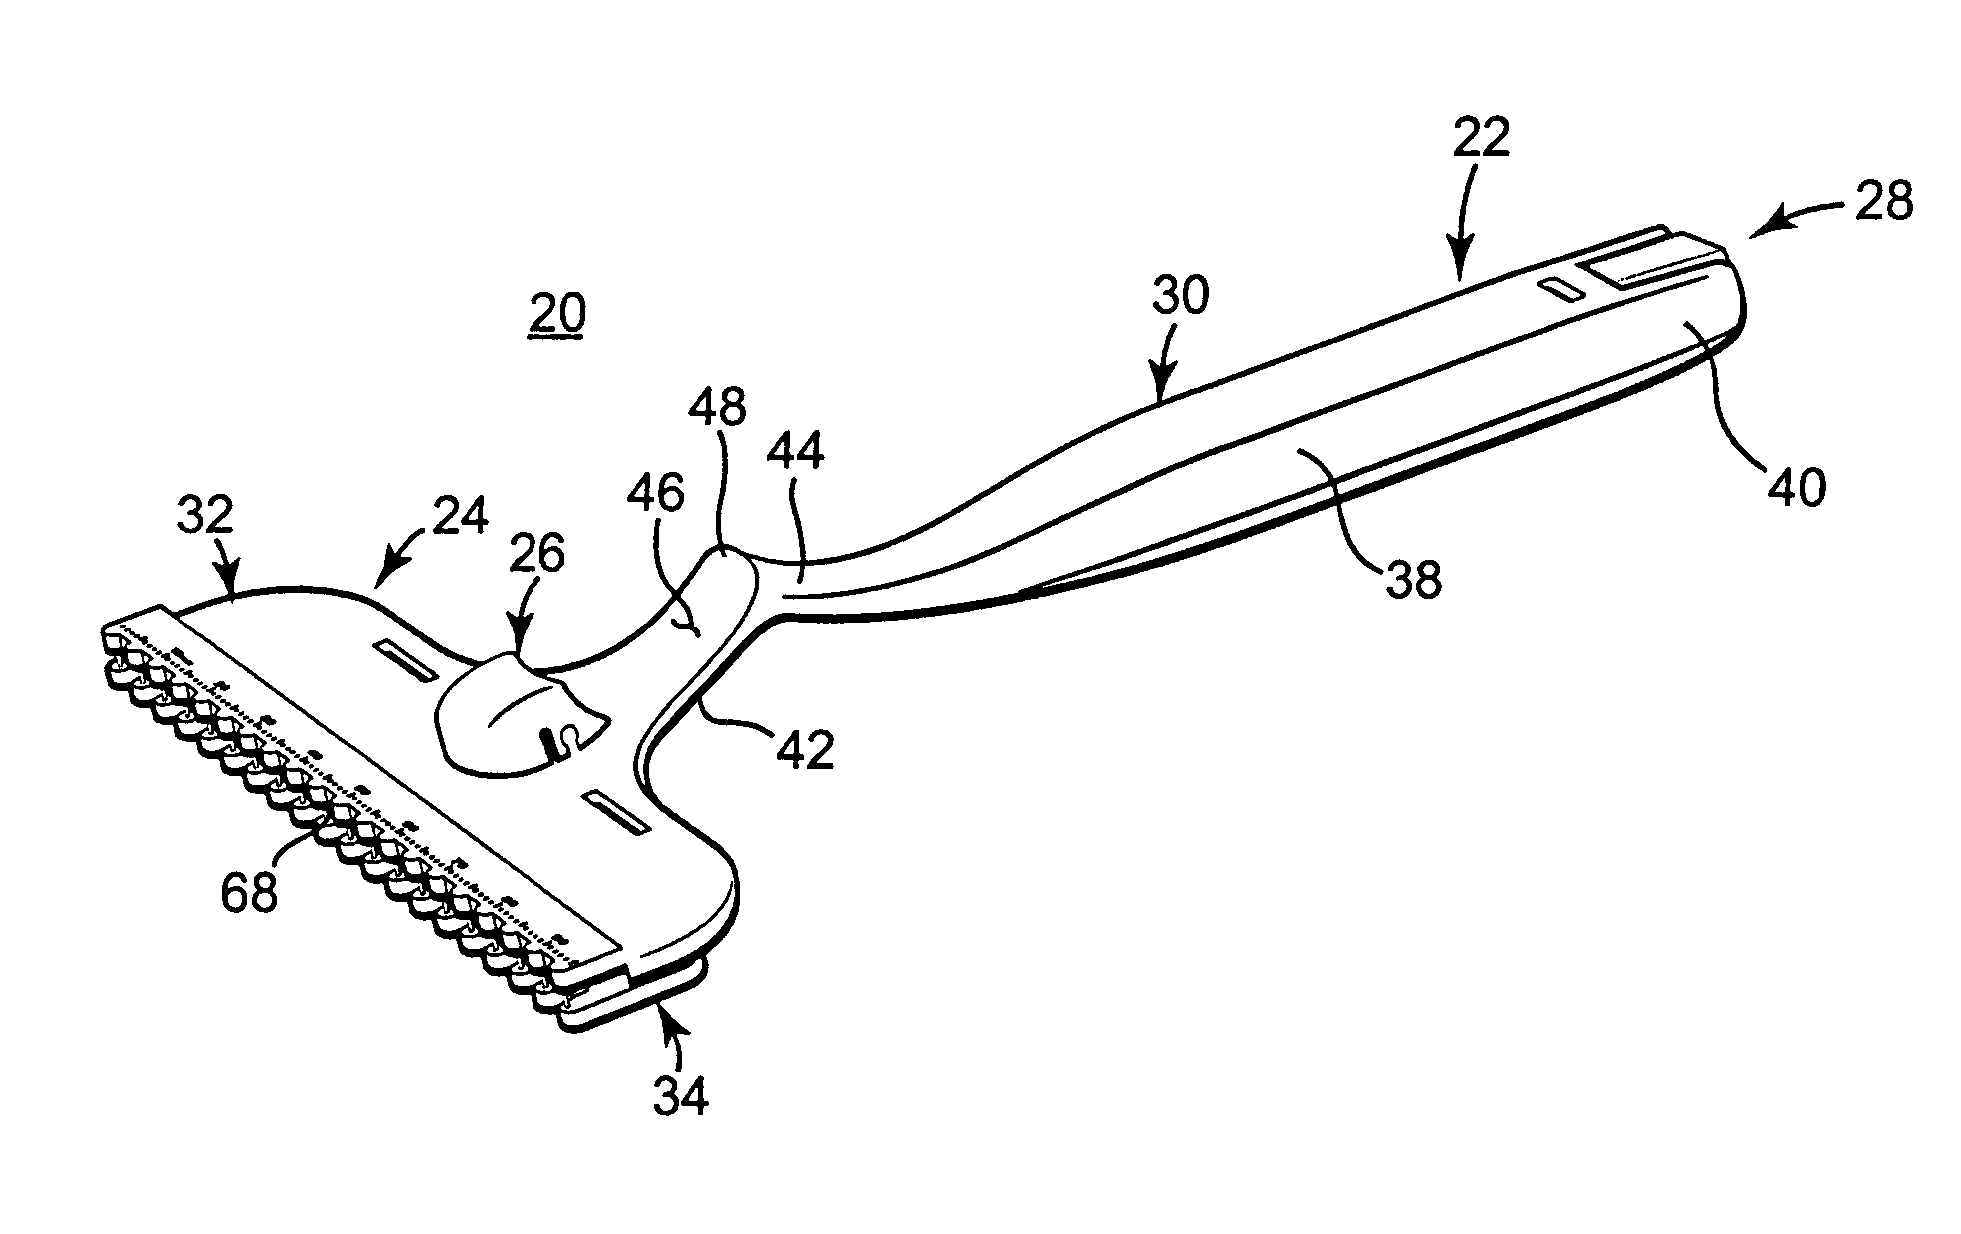 Tool and method for implanting an annuloplasty prosthesis